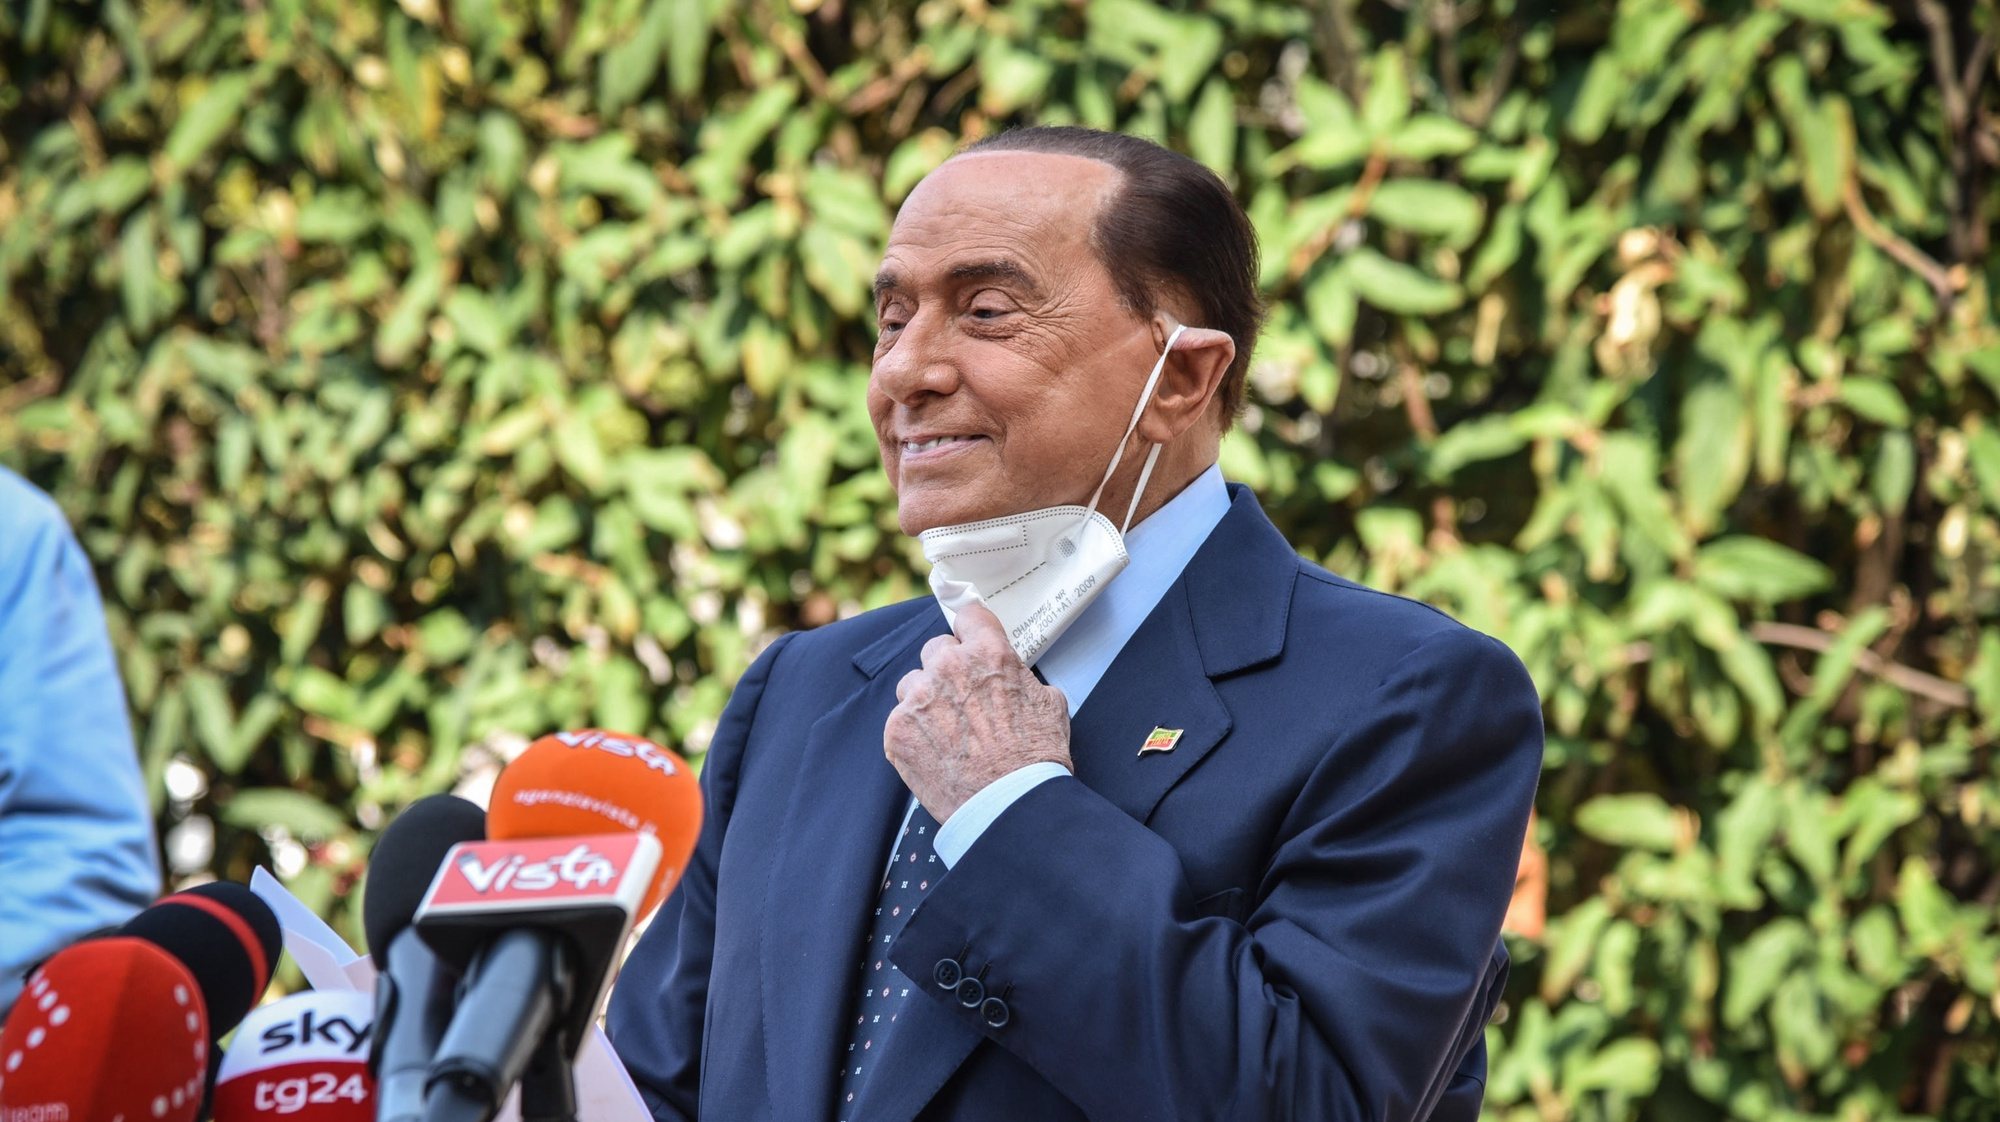 epa08667964 Former Italian prime minister Silvio Berlusconi speaks to the media as he leaves San Raffaele hospital in Milan, Italy, 14 September 2020. Silvio Berlusconi said suffering from COVID-19 was &#039;the most dangerous ordeal of my life&#039;, as he was discharged from Milan&#039;s San Raffaele hospital on 14 September. Berlusconi was hospitalized on 04 September with COVID-related bilateral pneumonia.  EPA/MATTEO CORNER